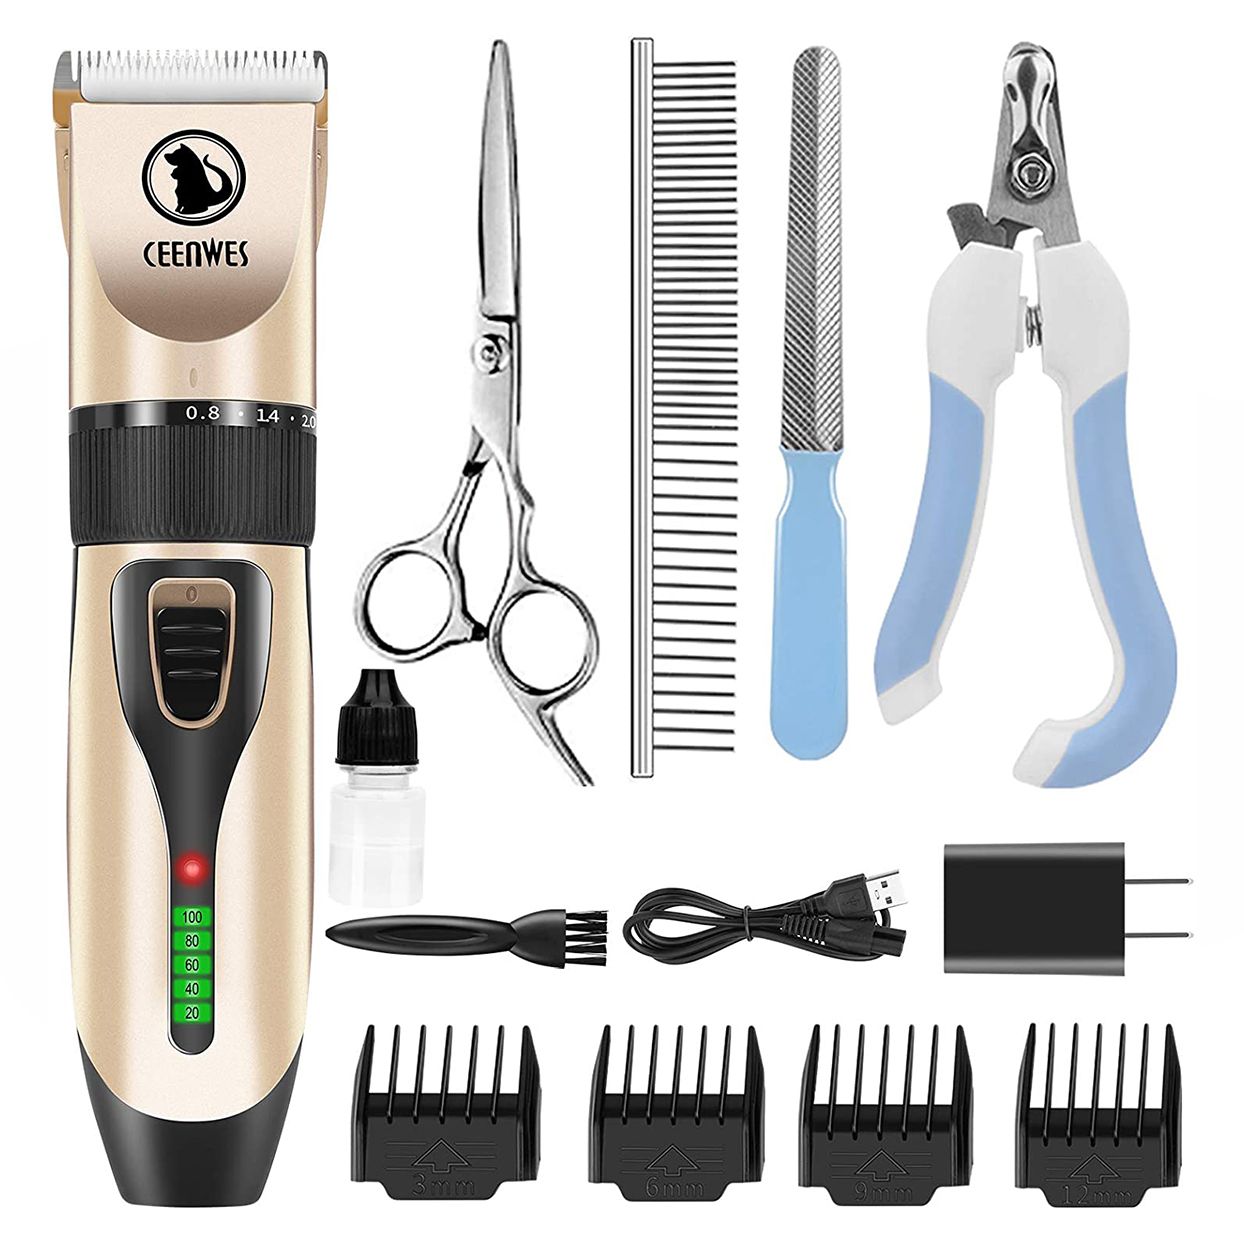 Ceenwes LCD Display Cordless Pet Grooming Clippers Kit